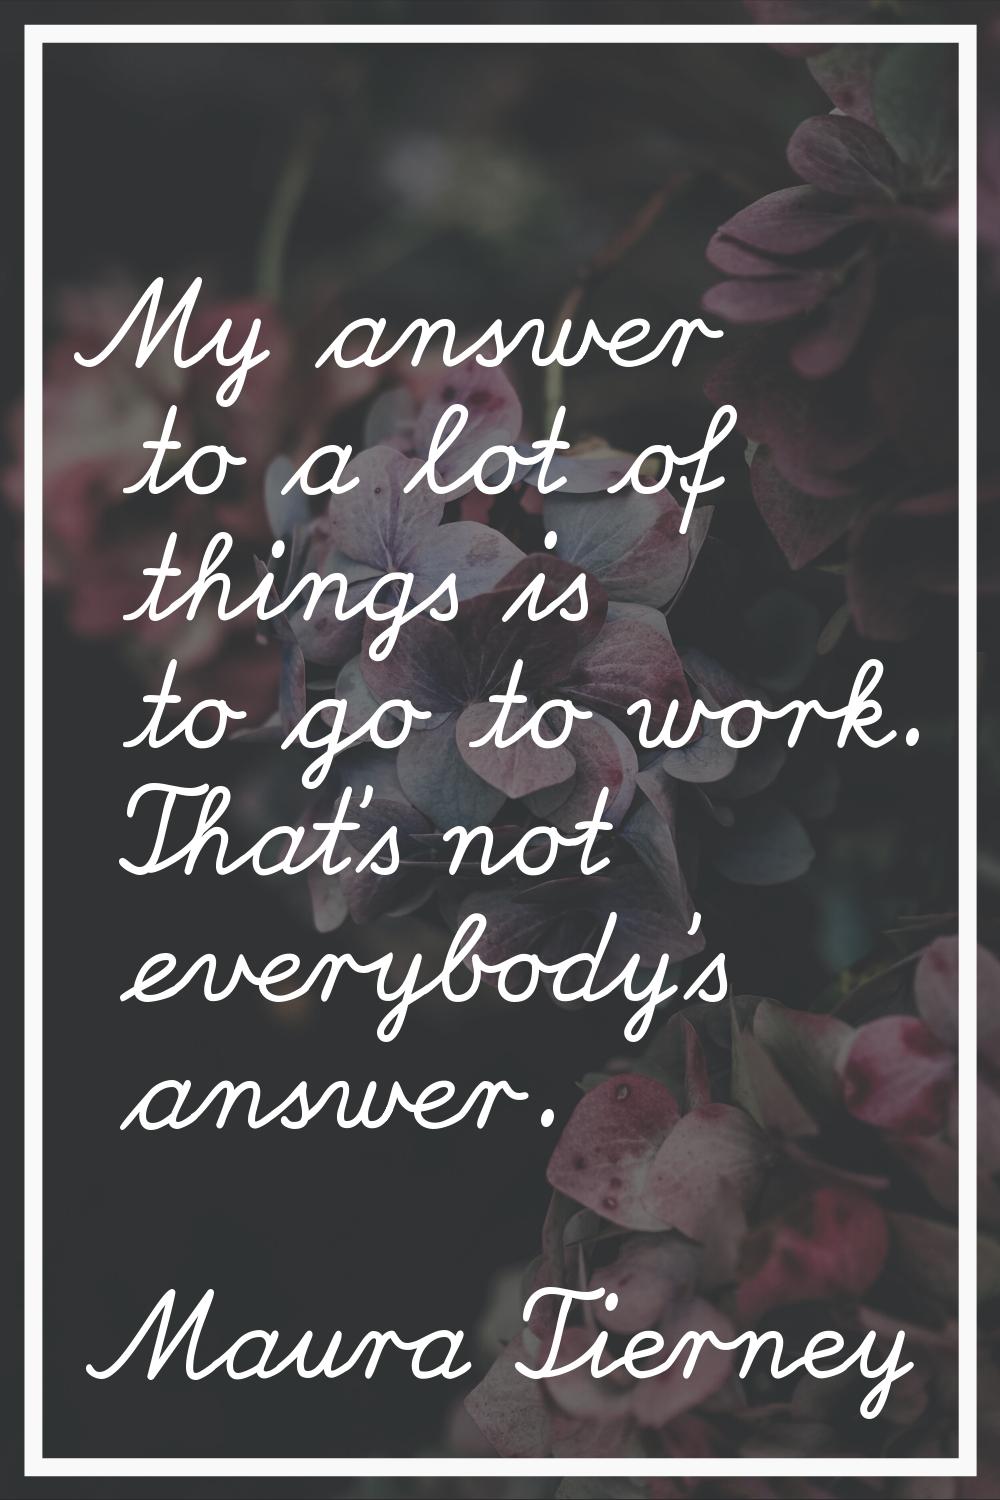 My answer to a lot of things is to go to work. That's not everybody's answer.